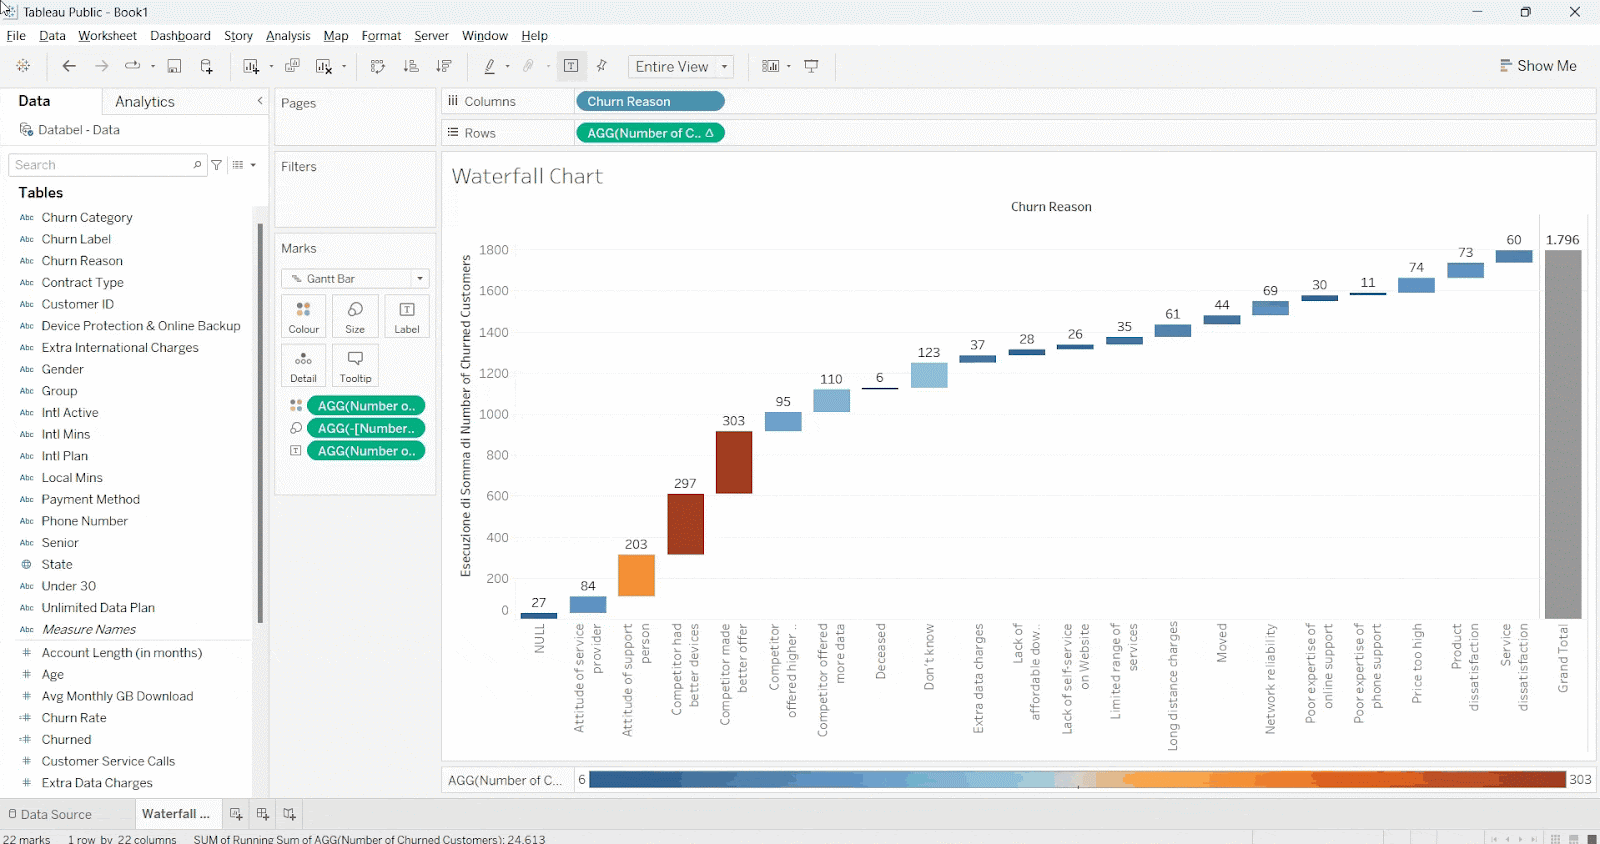 How to add a legend and a filter in a chart in Tableau